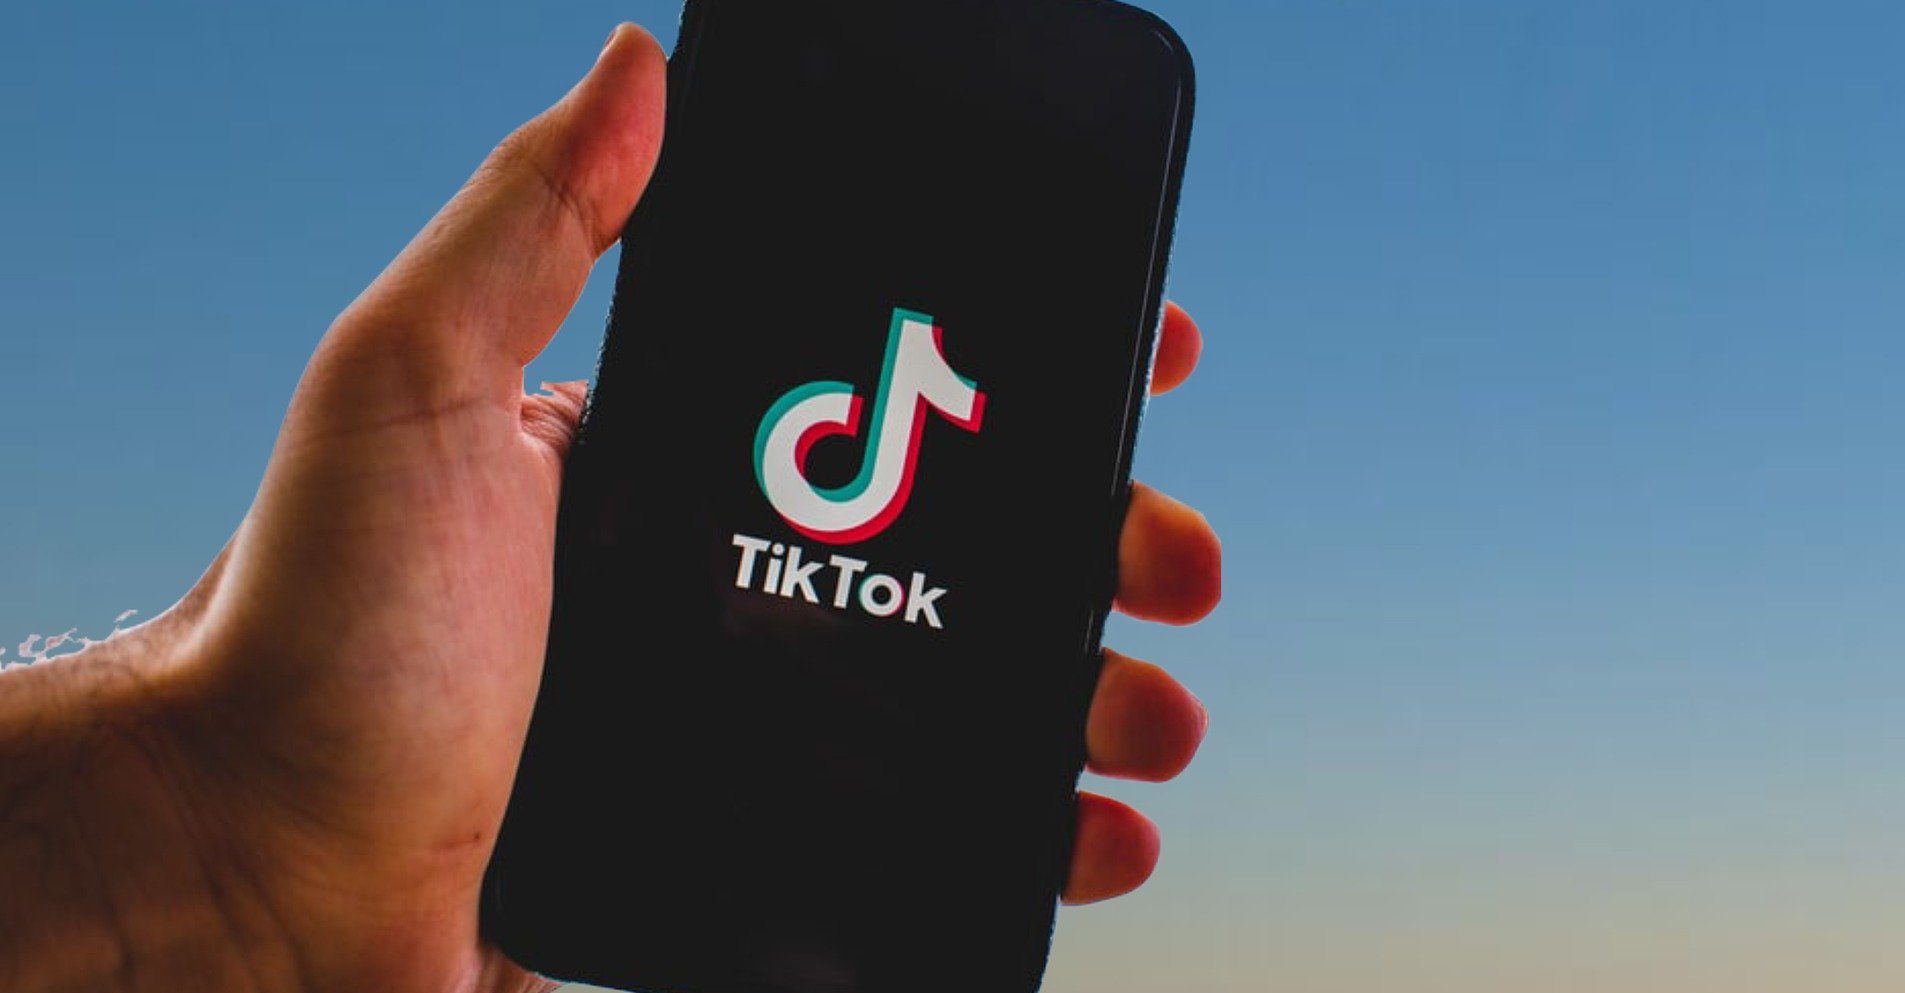 Trump administration bans downloads of Tik Tok and WeChat